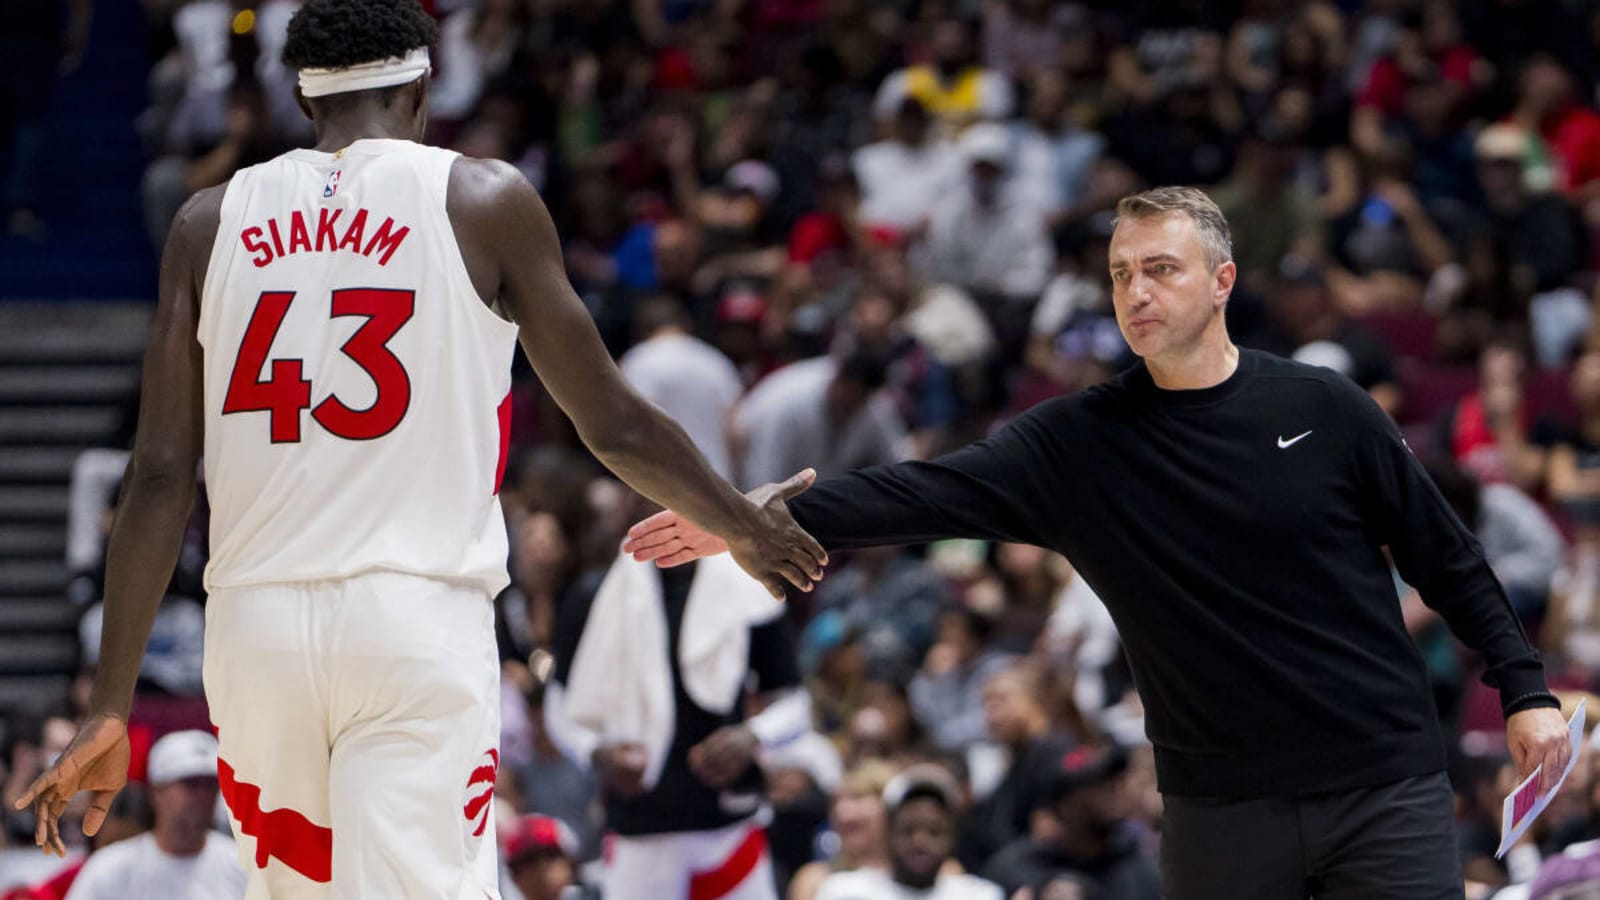 Toronto Raptors head coach Darko Rajakovic on Pacers&#39; Pascal Siakam: &#39;He&#39;s a great fit for Indiana&#39;